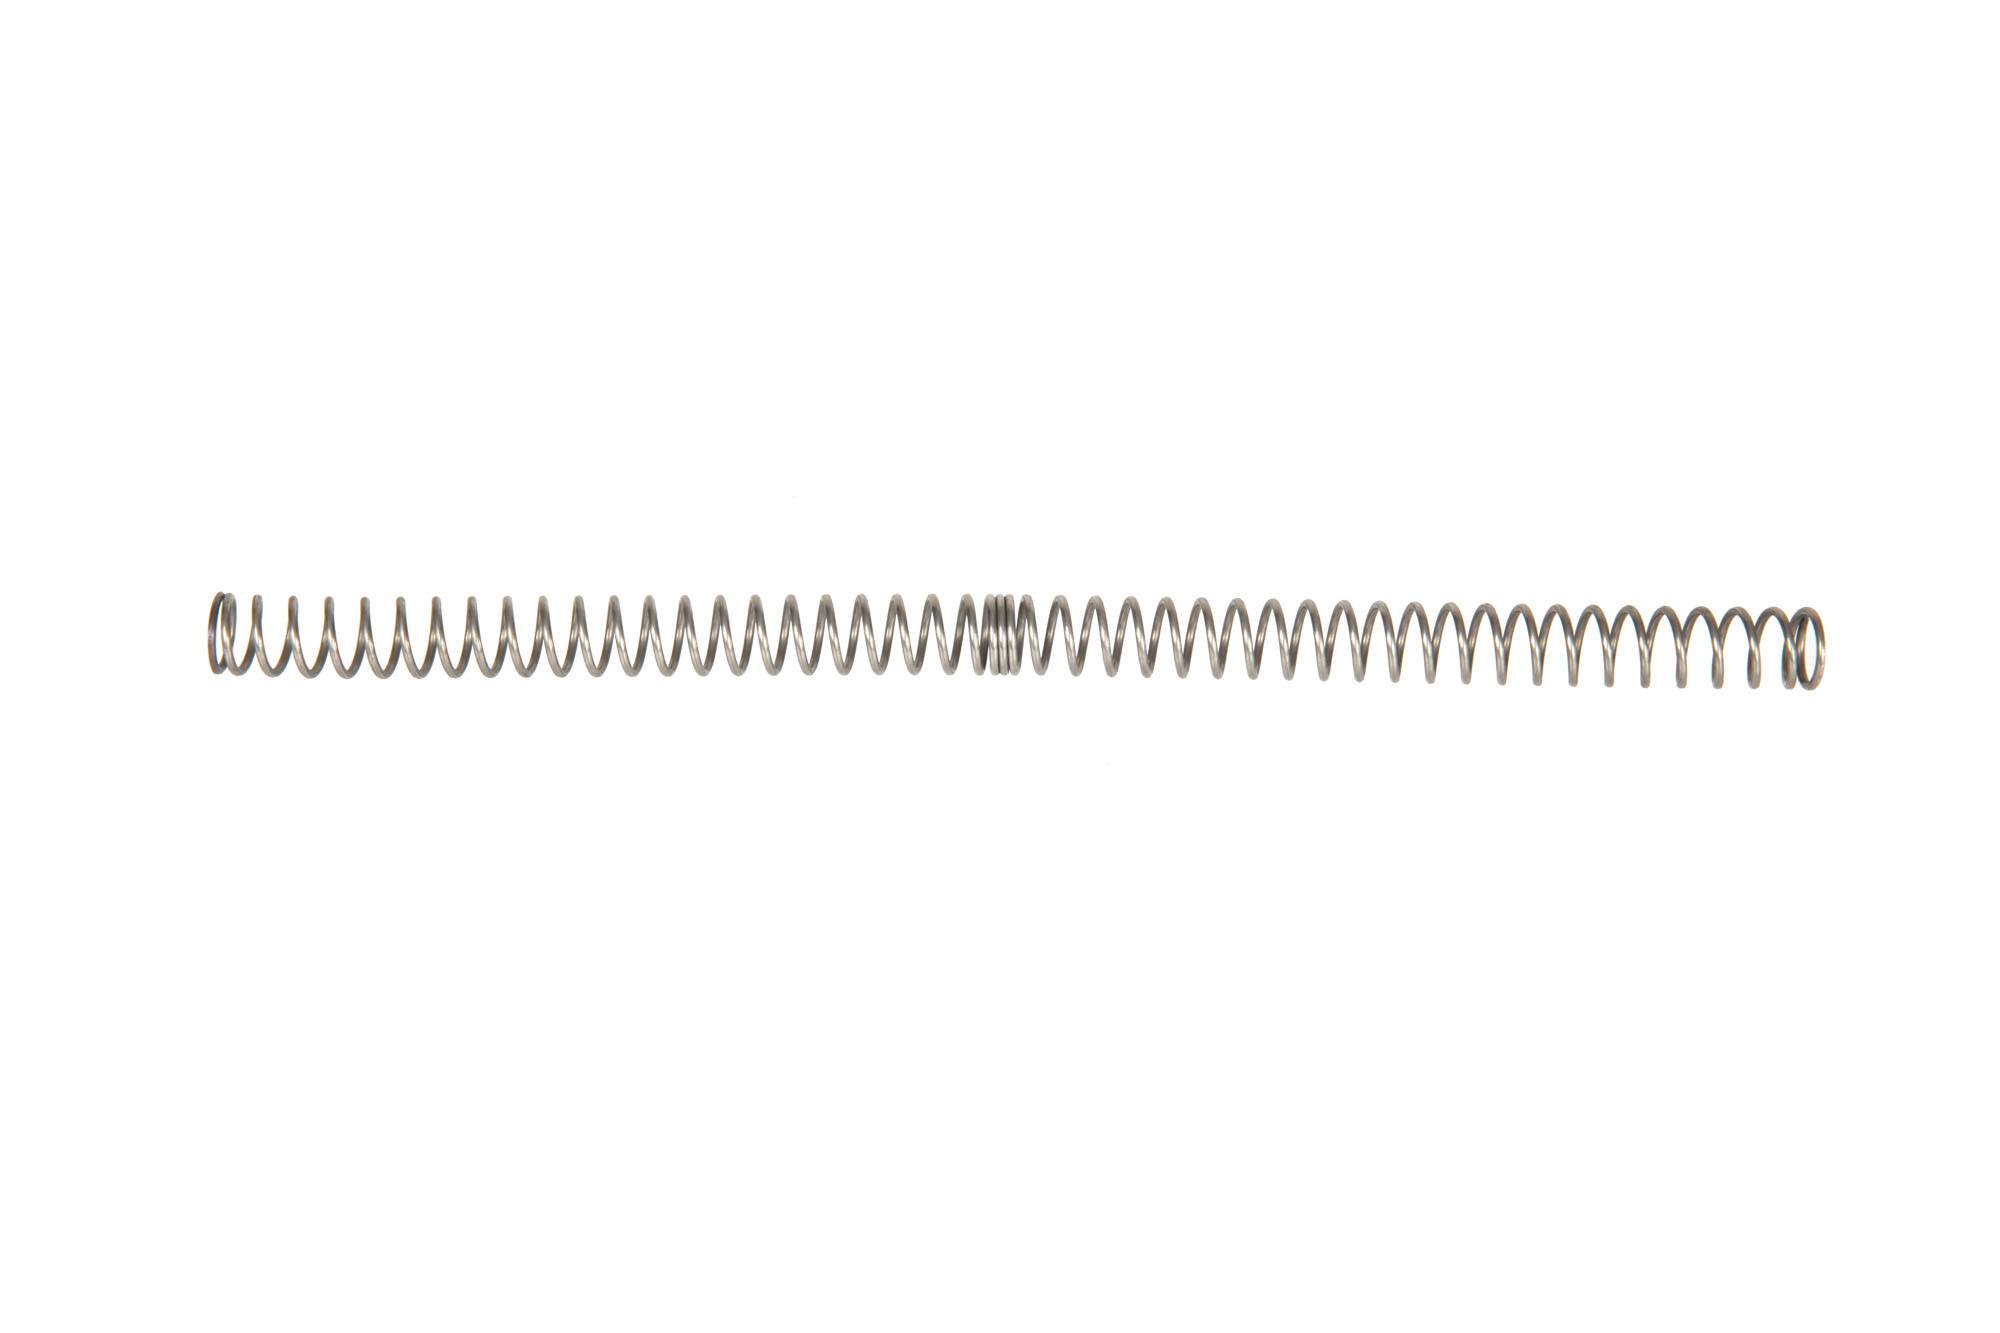 M140 Spring for SRS Sniper Rifle Replicas - Pull Bolt Version